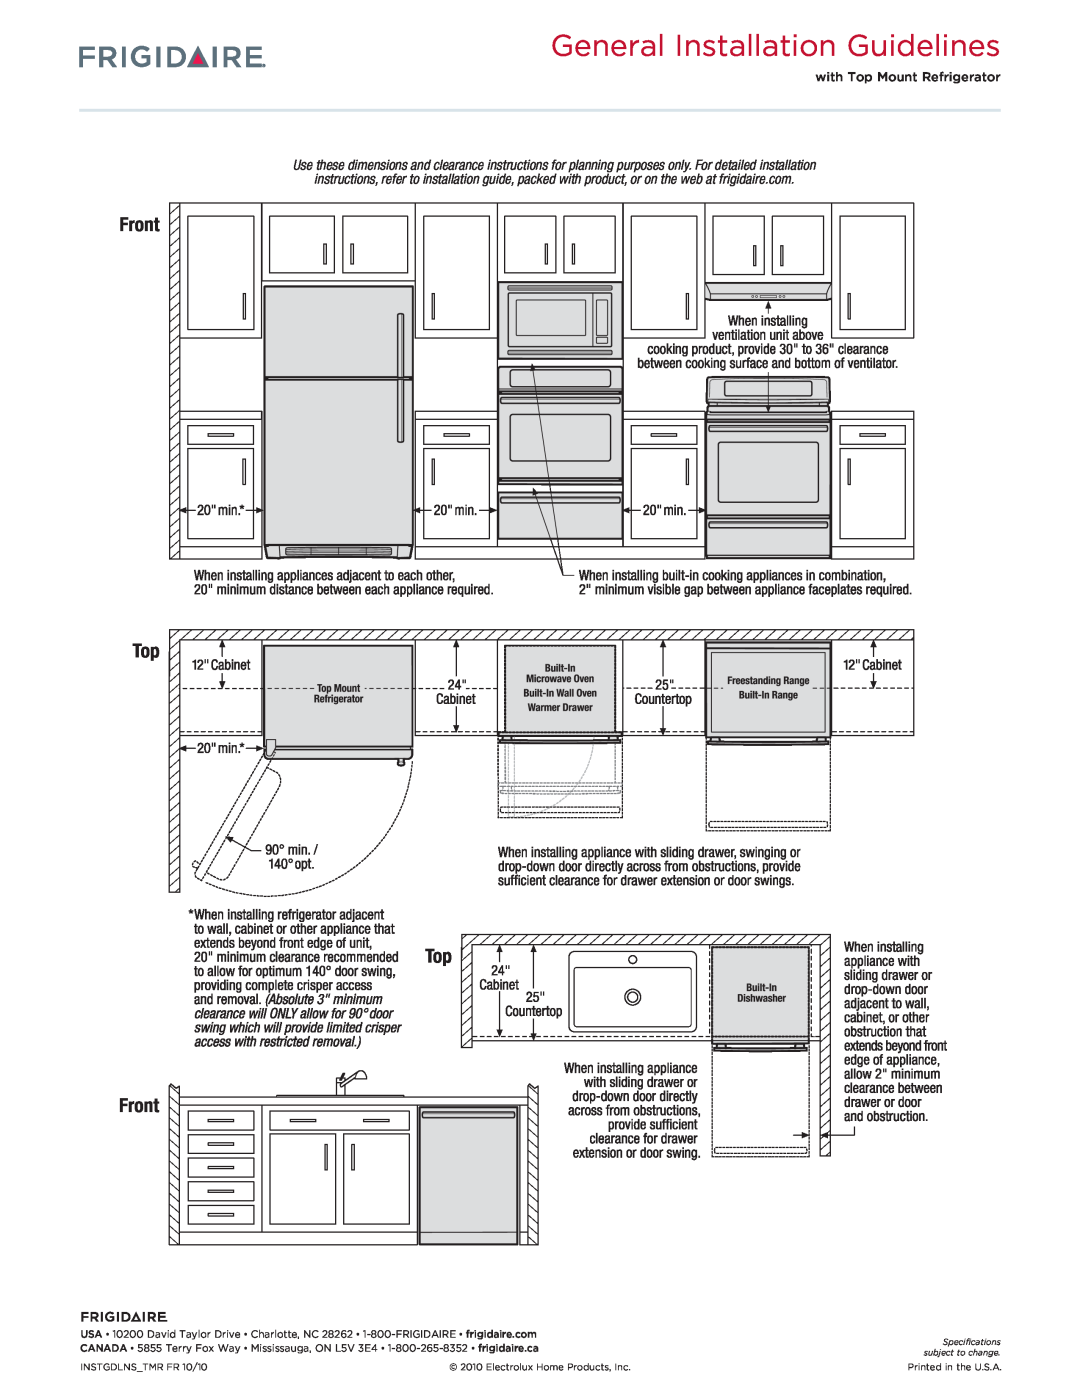 Frigidaire FFGF3051L S dimensions General Installation Guidelines, Top Front, with Top Mount Refrigerator 